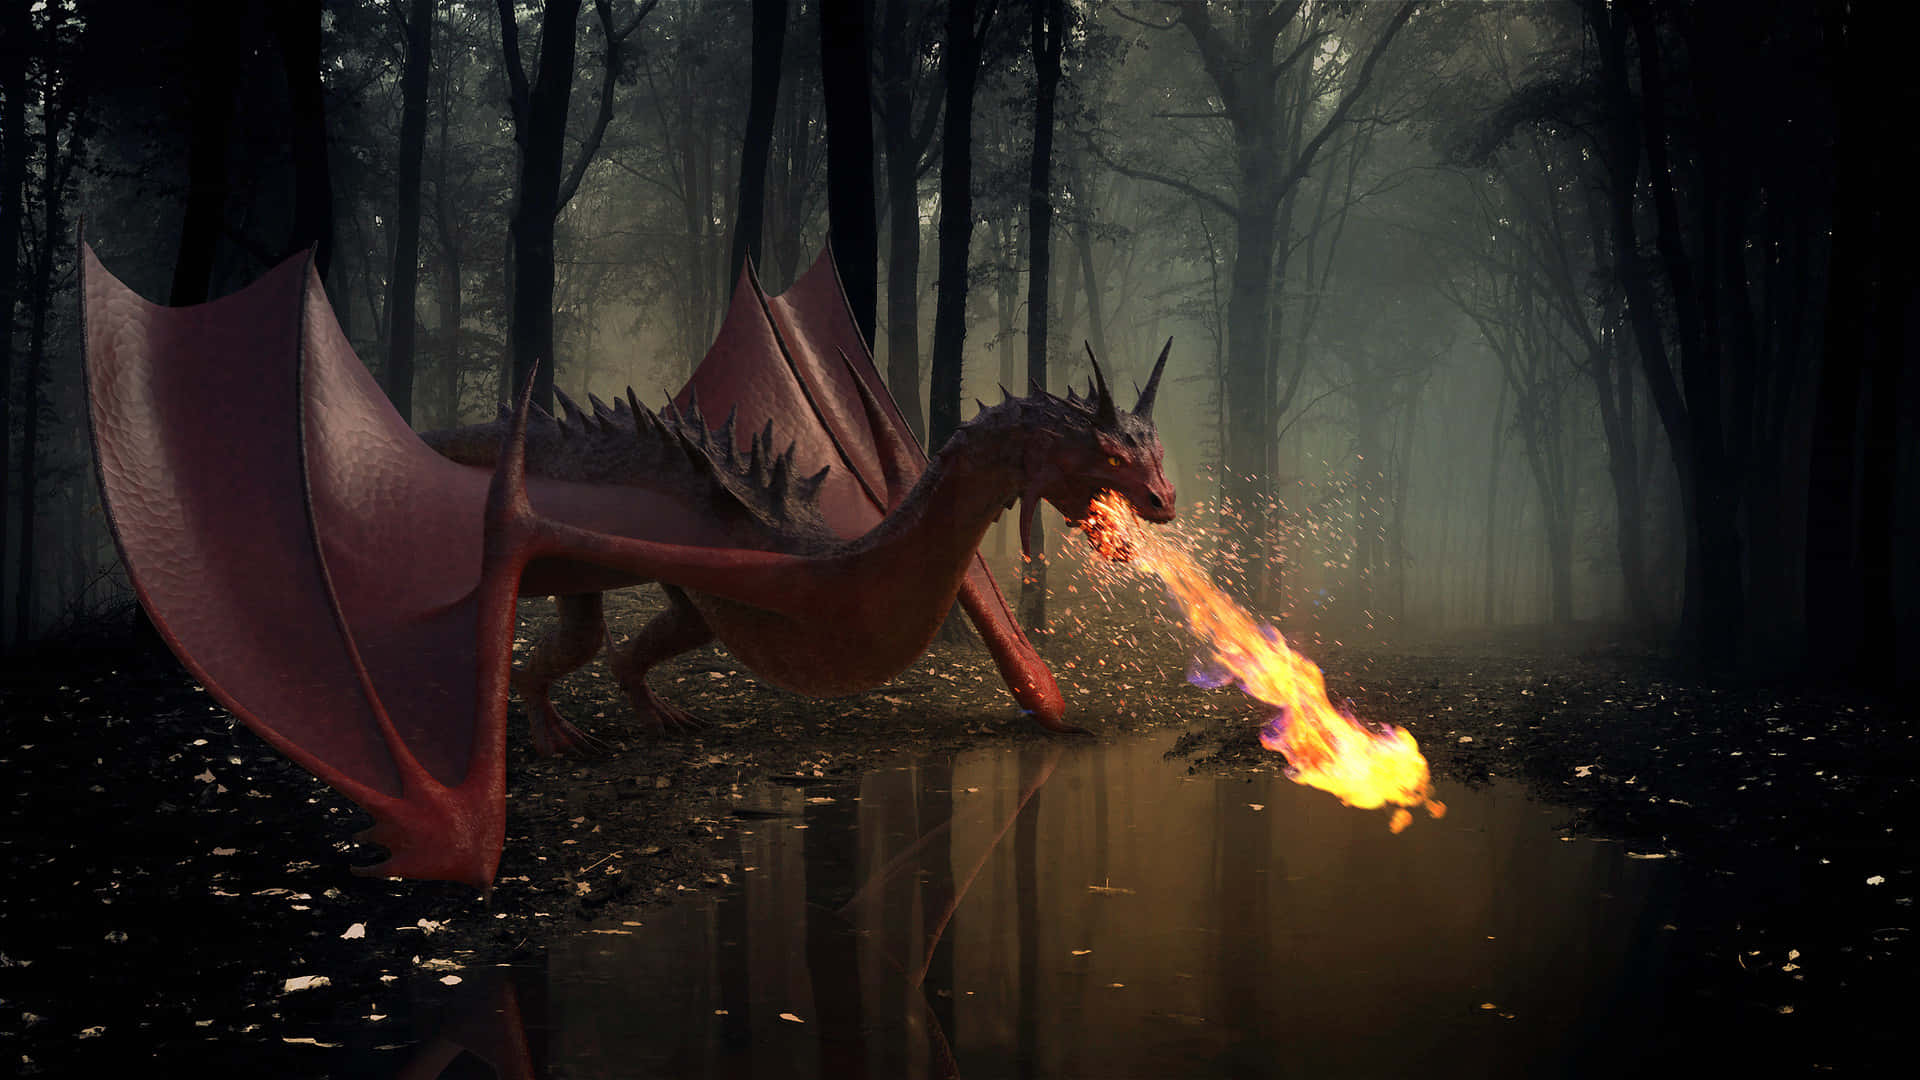 A powerful dragon soars above a dense, misty forest Wallpaper